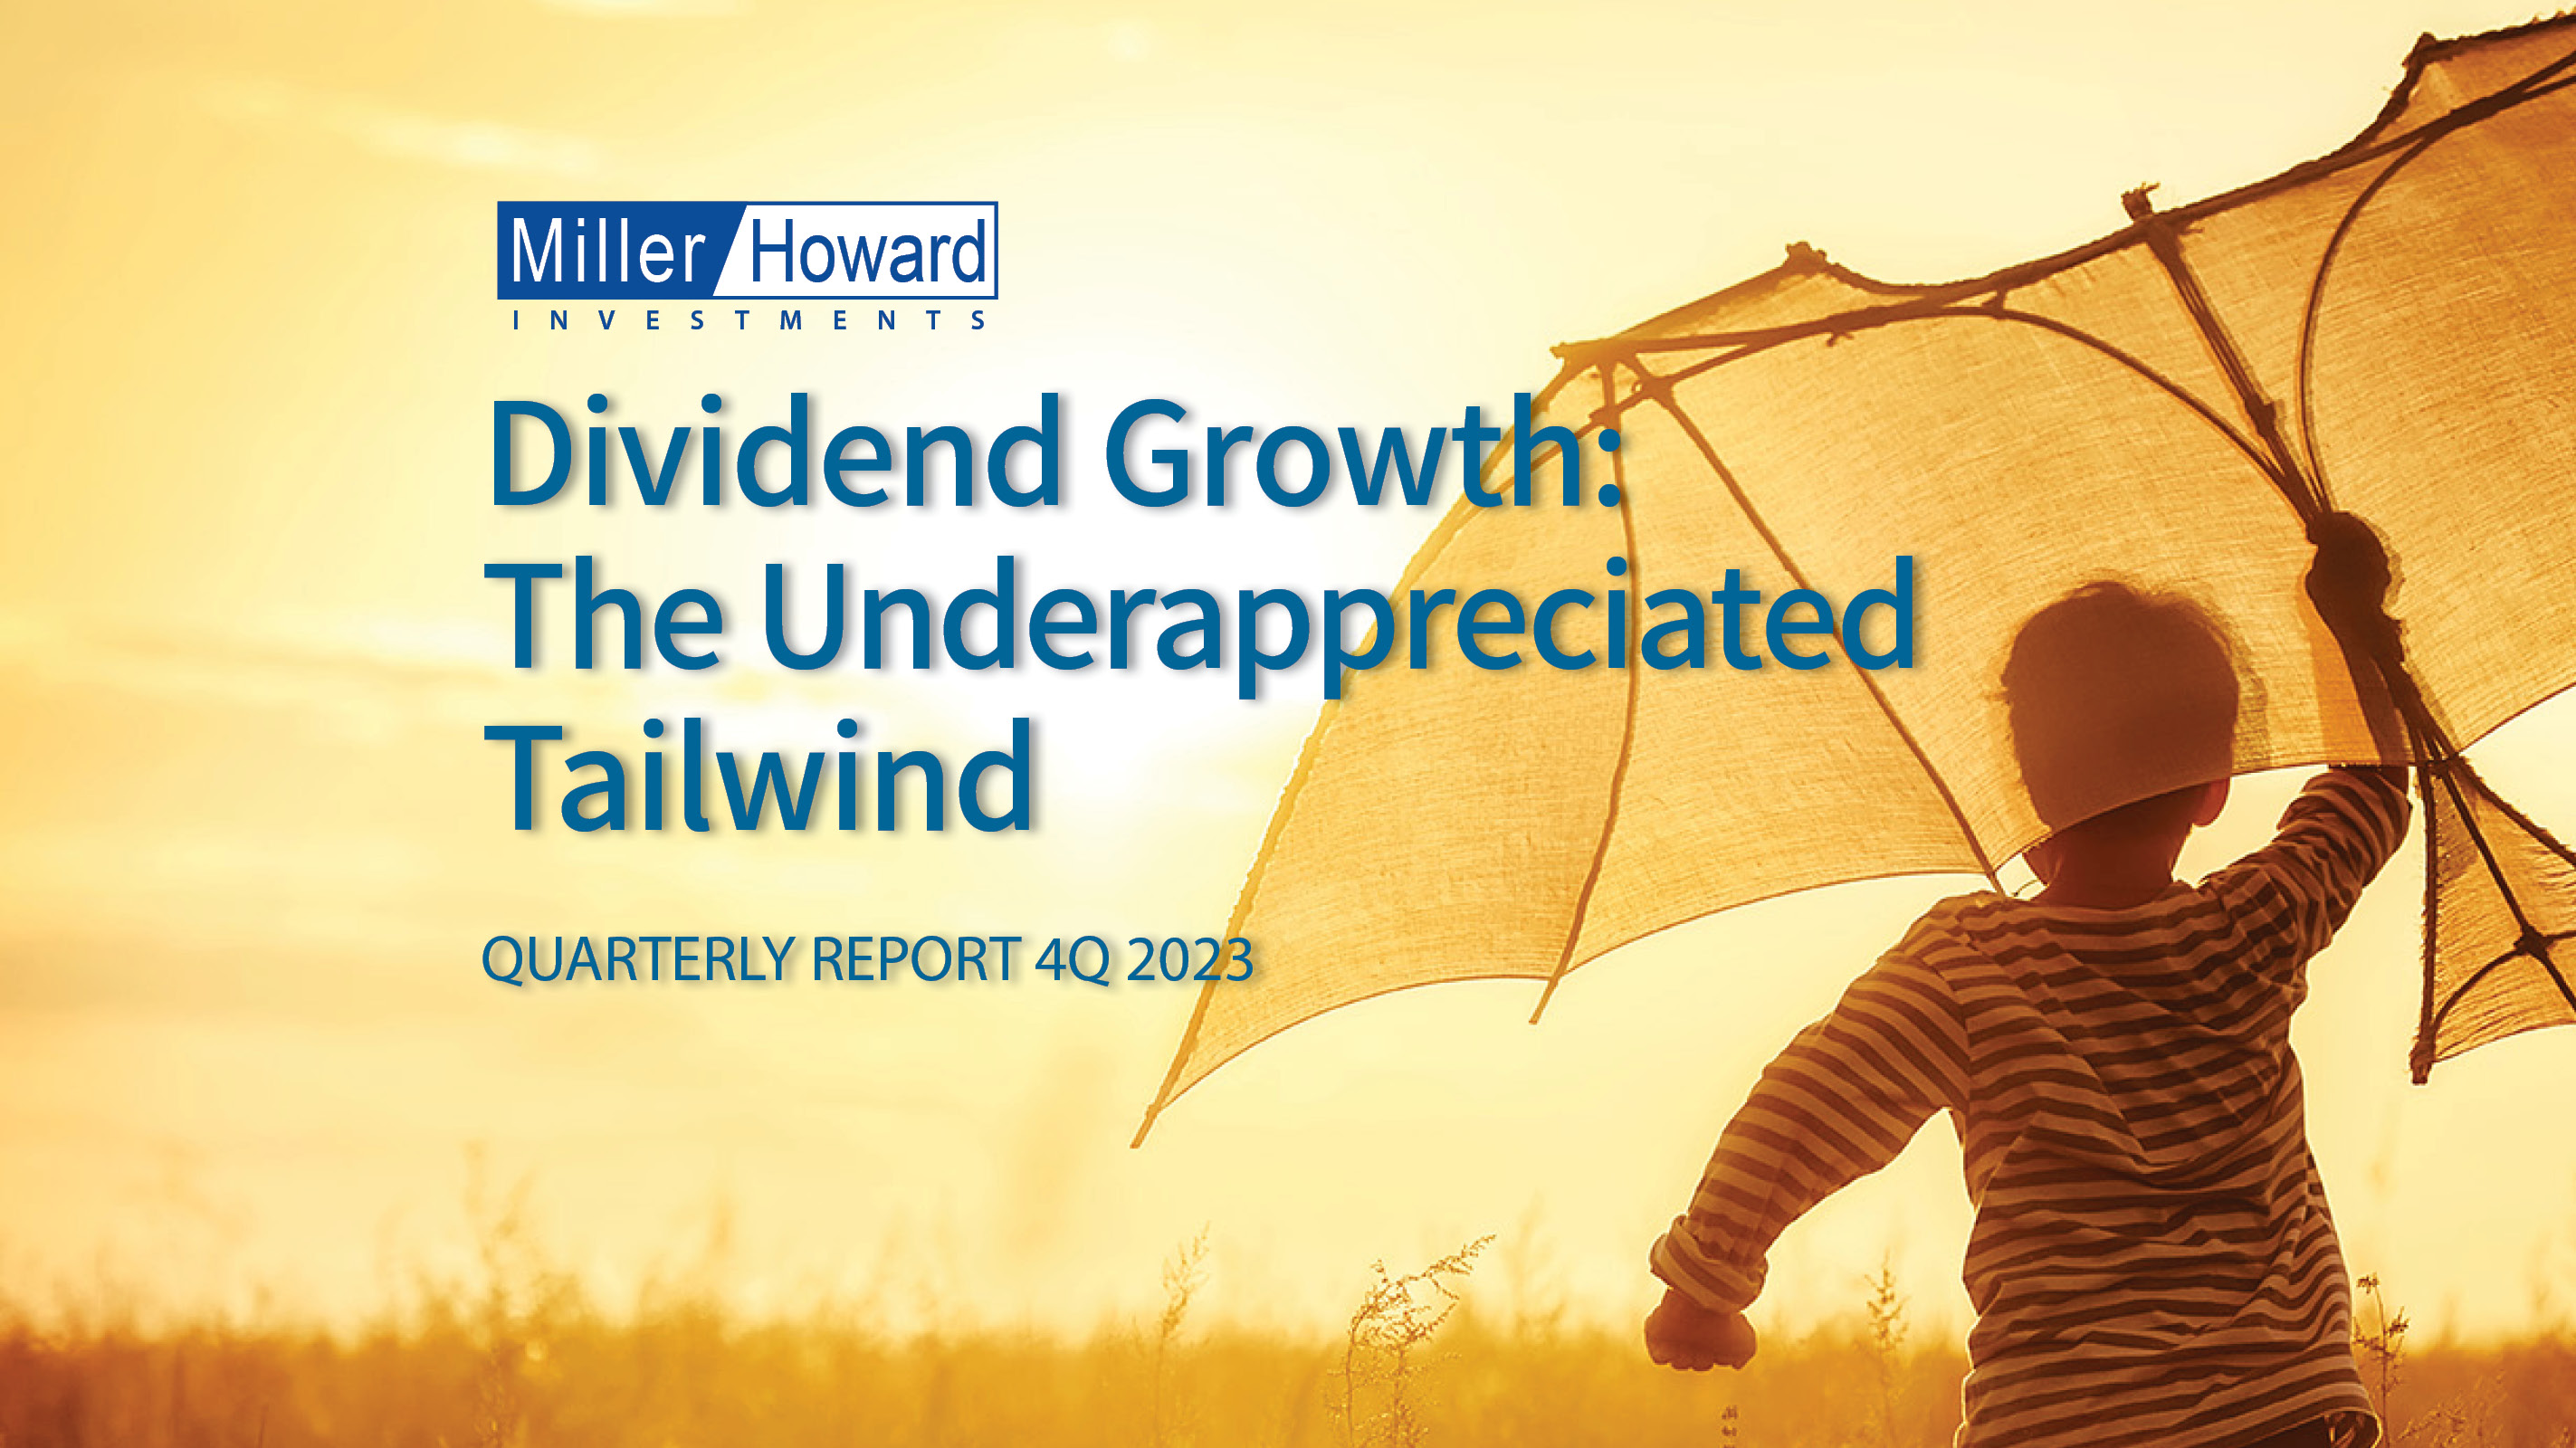 Dividend Growth: The Underappreciated Tailwind